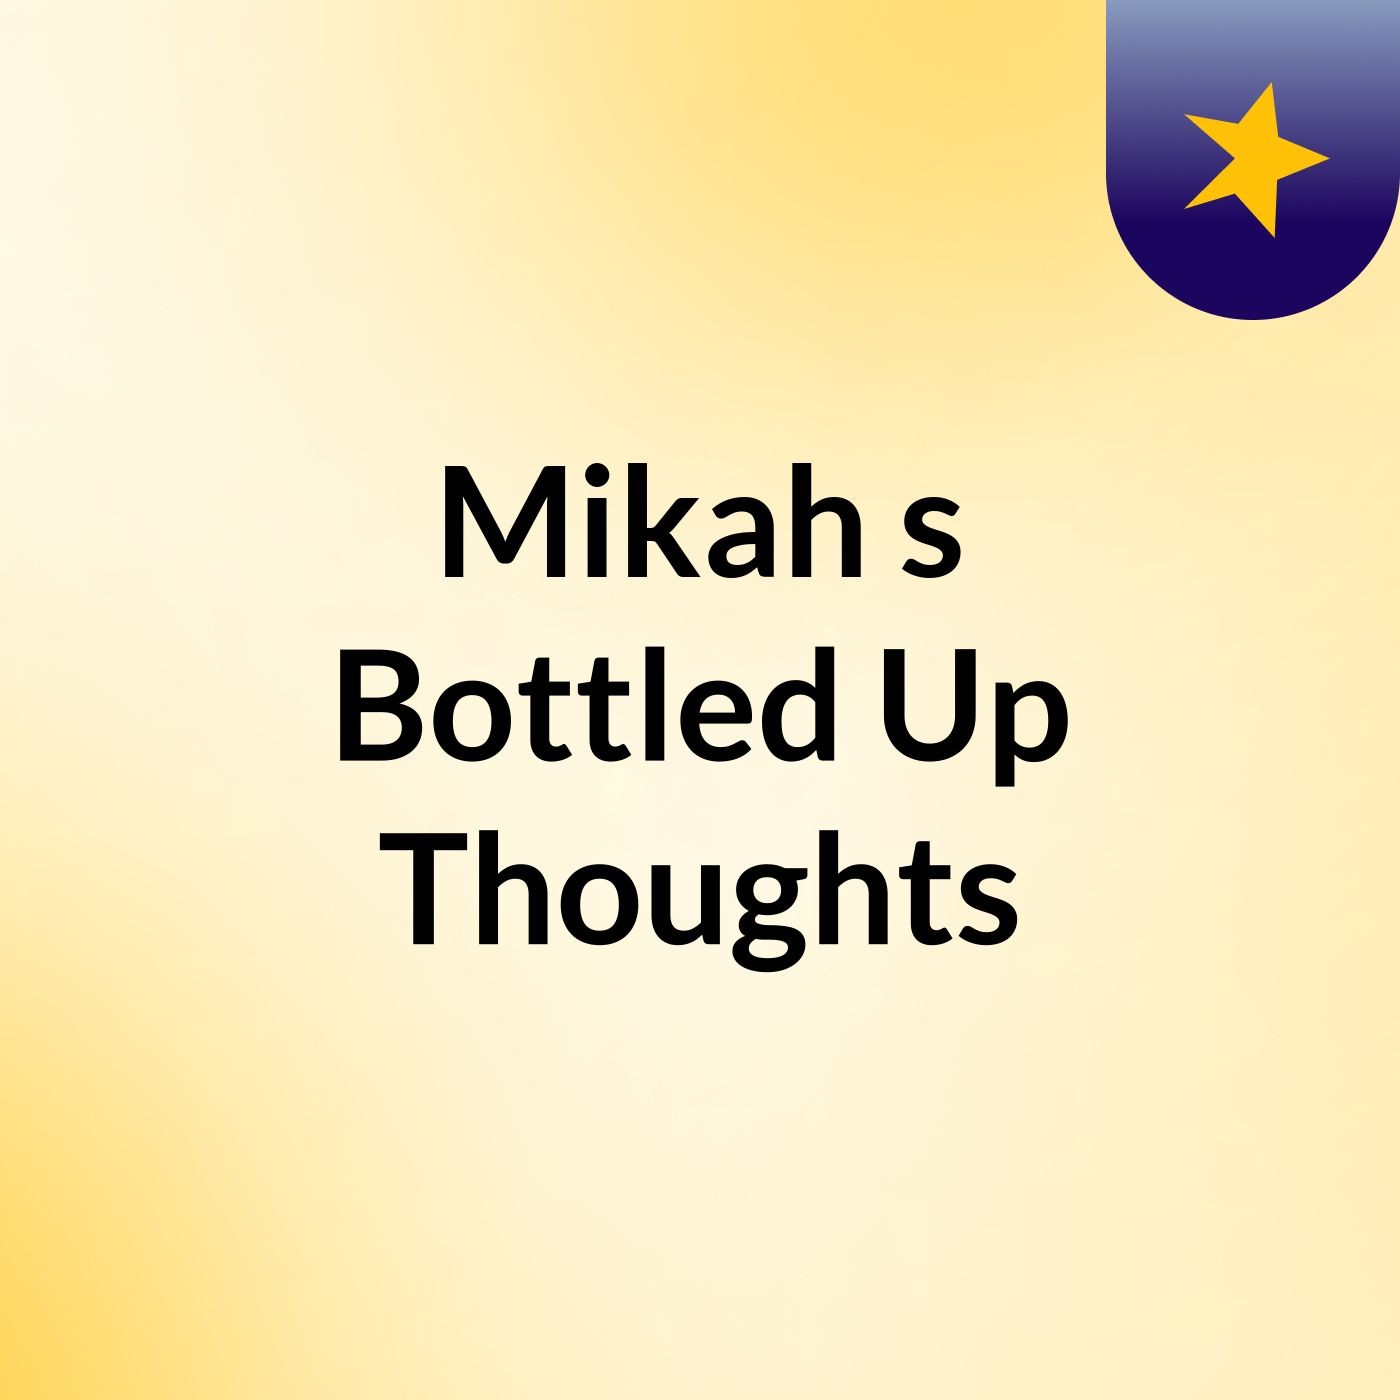 Mikah's Bottled Up Thoughts